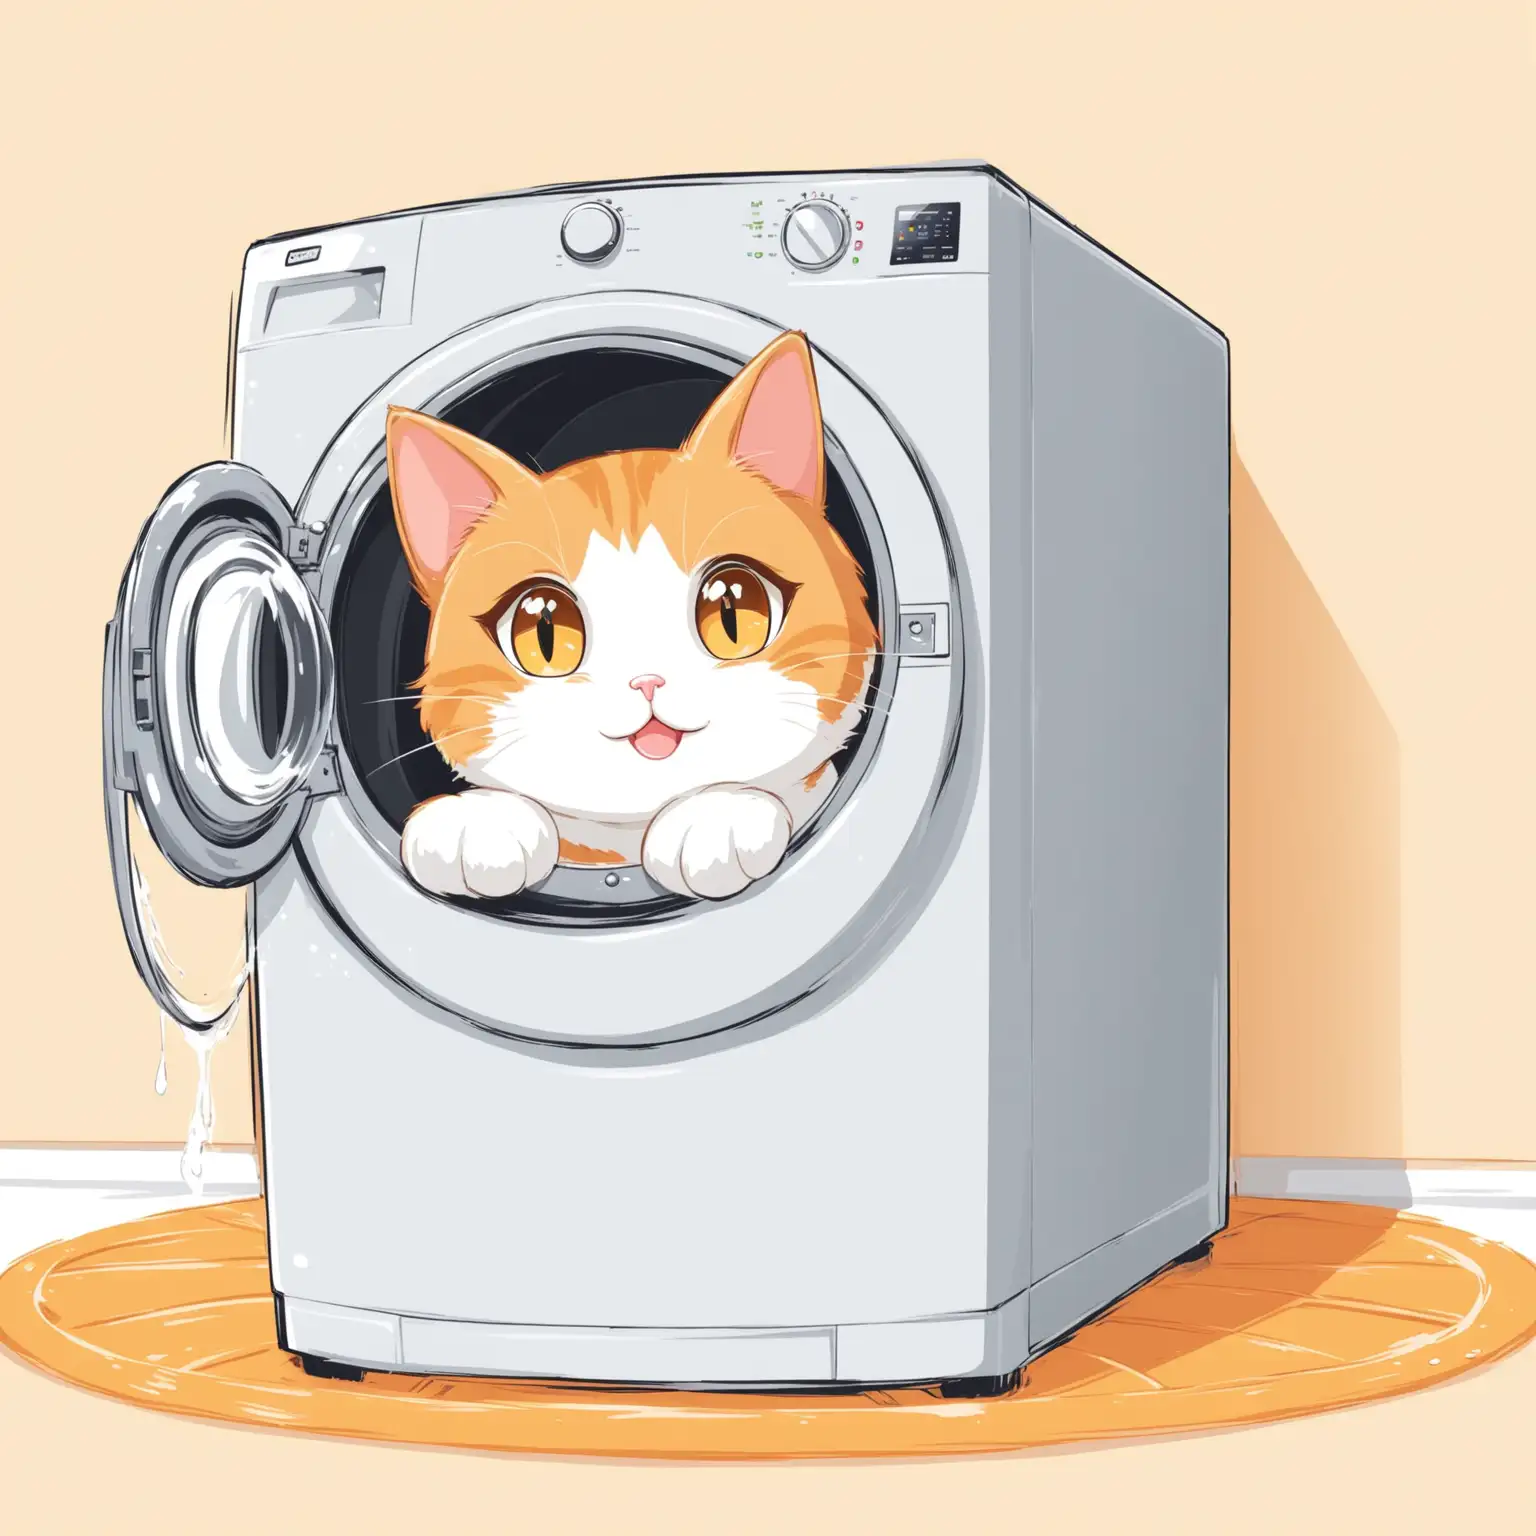 cartoon of a cat in a washing machine. The background is white